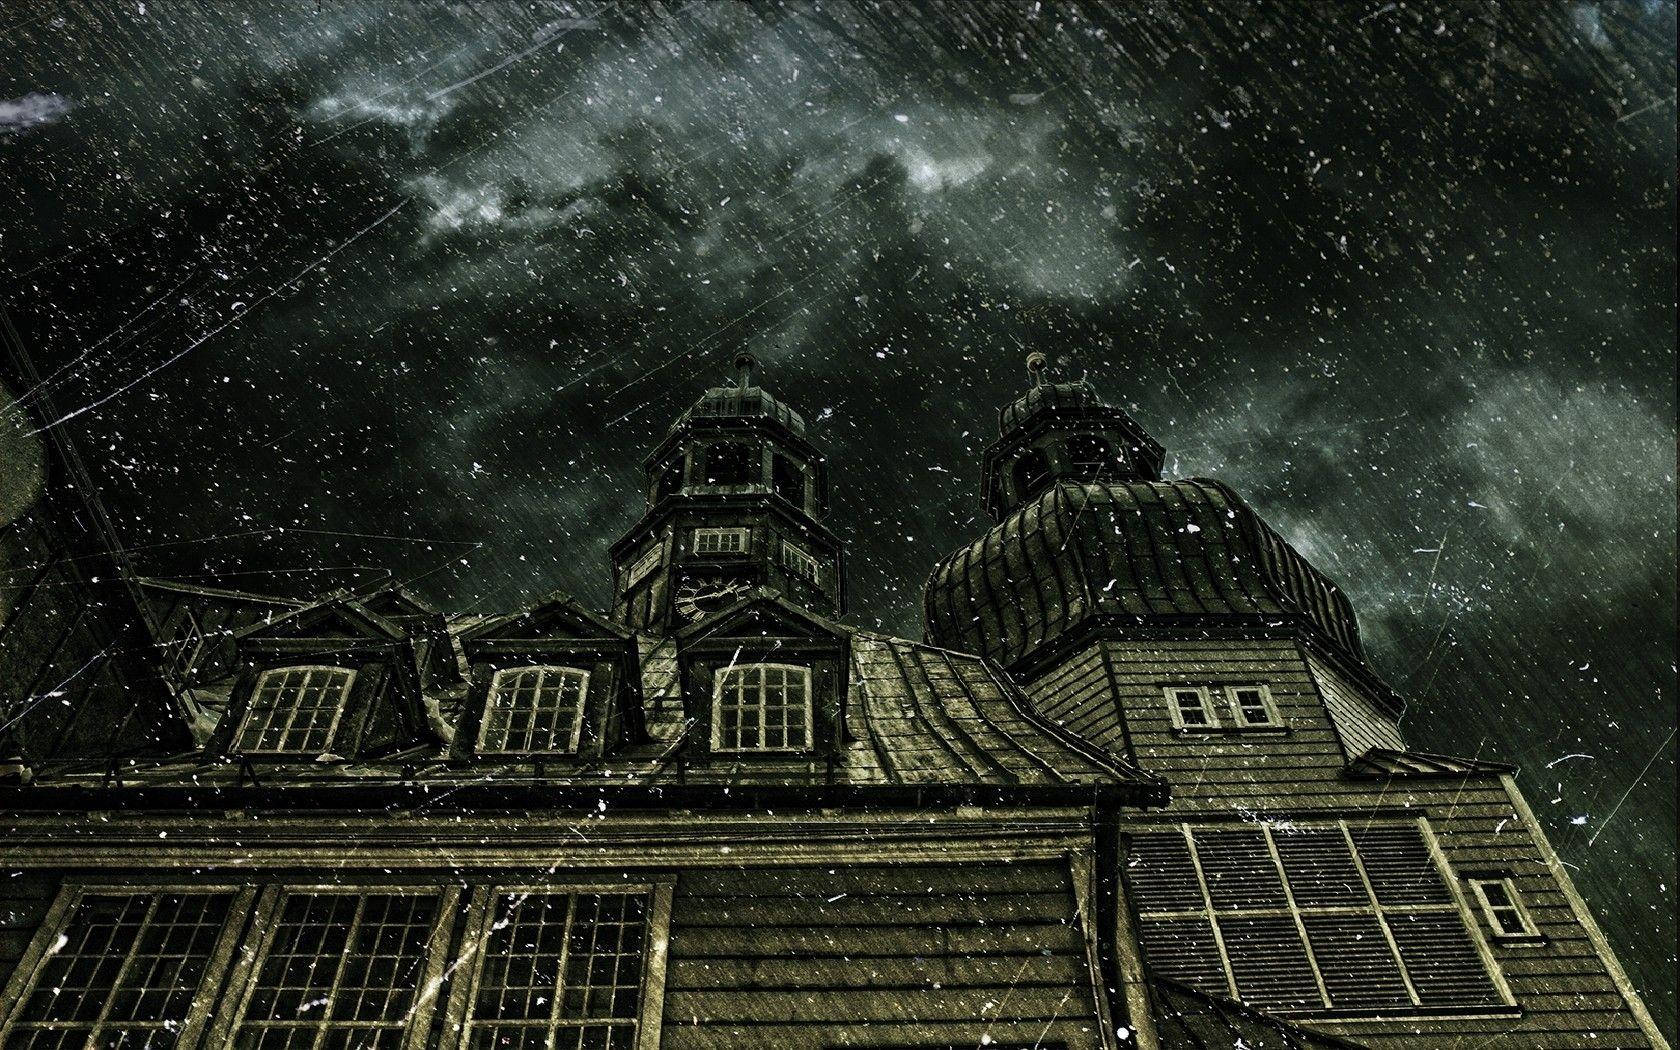 Step Inside The Spooky Haunted House On This Halloween Night! Wallpaper